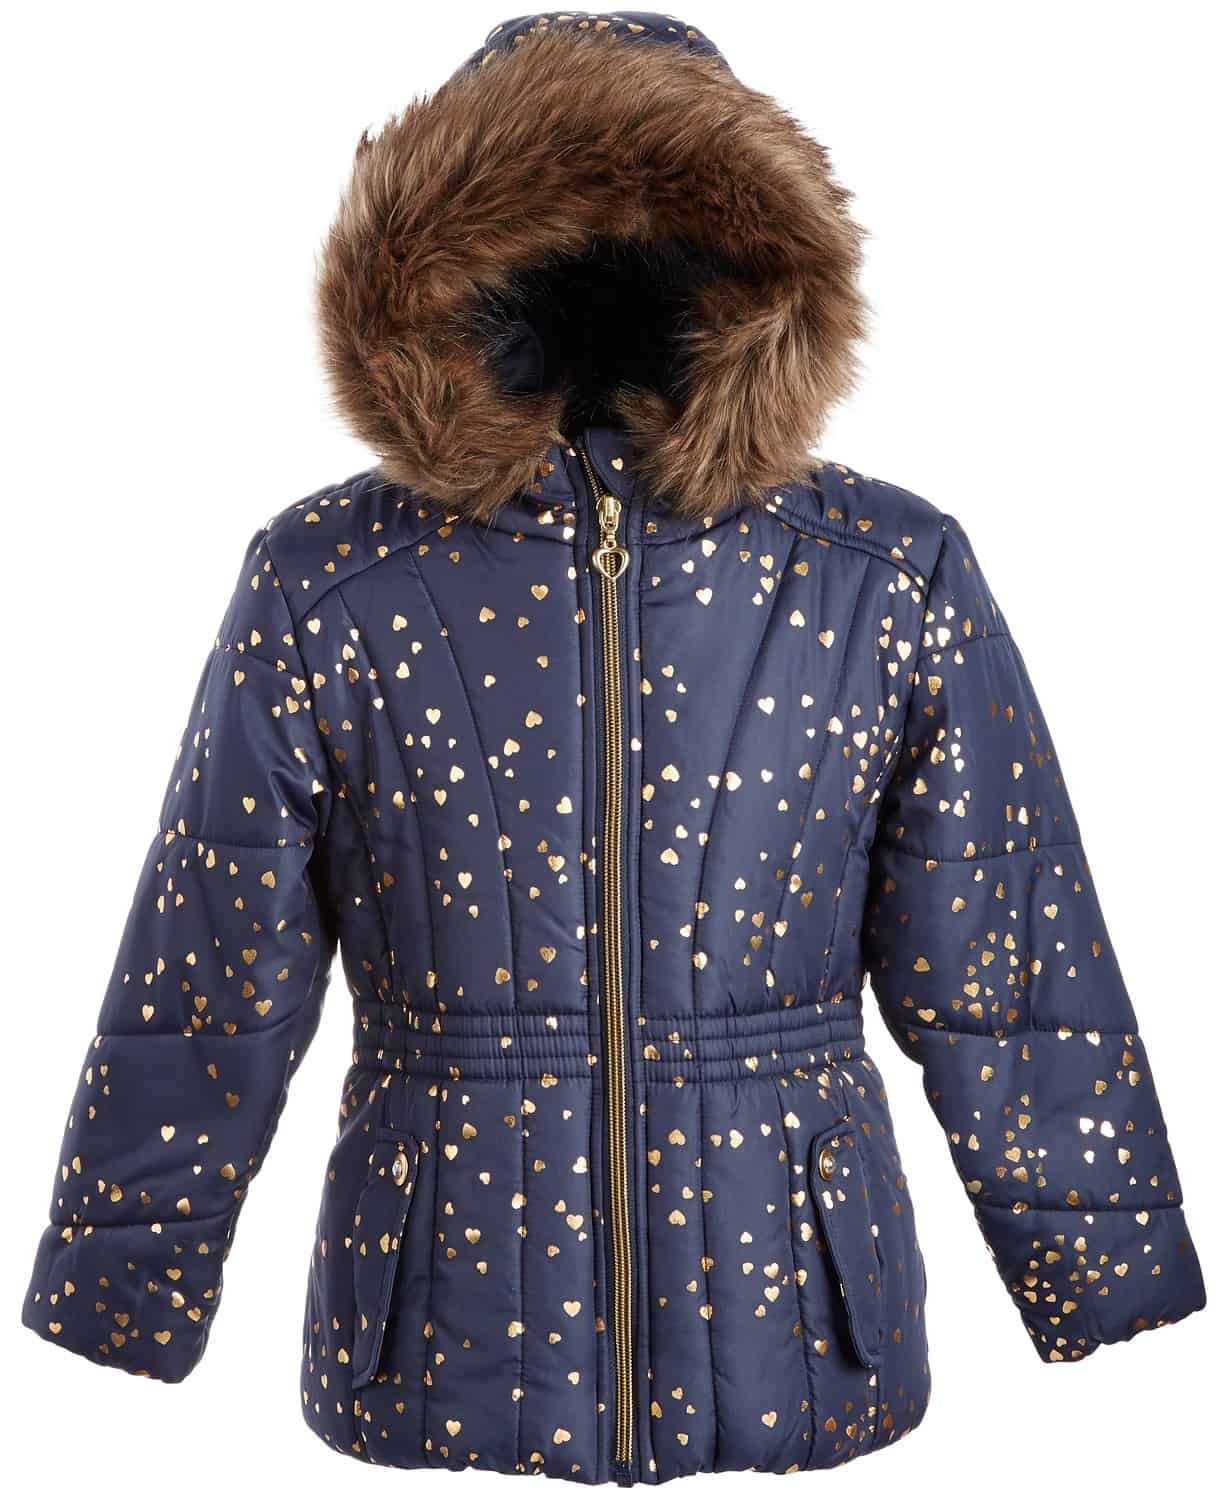 DEAL ALERT! Kids Puffer Jackets for only $15.99 at Macy's! | The Mom Friend